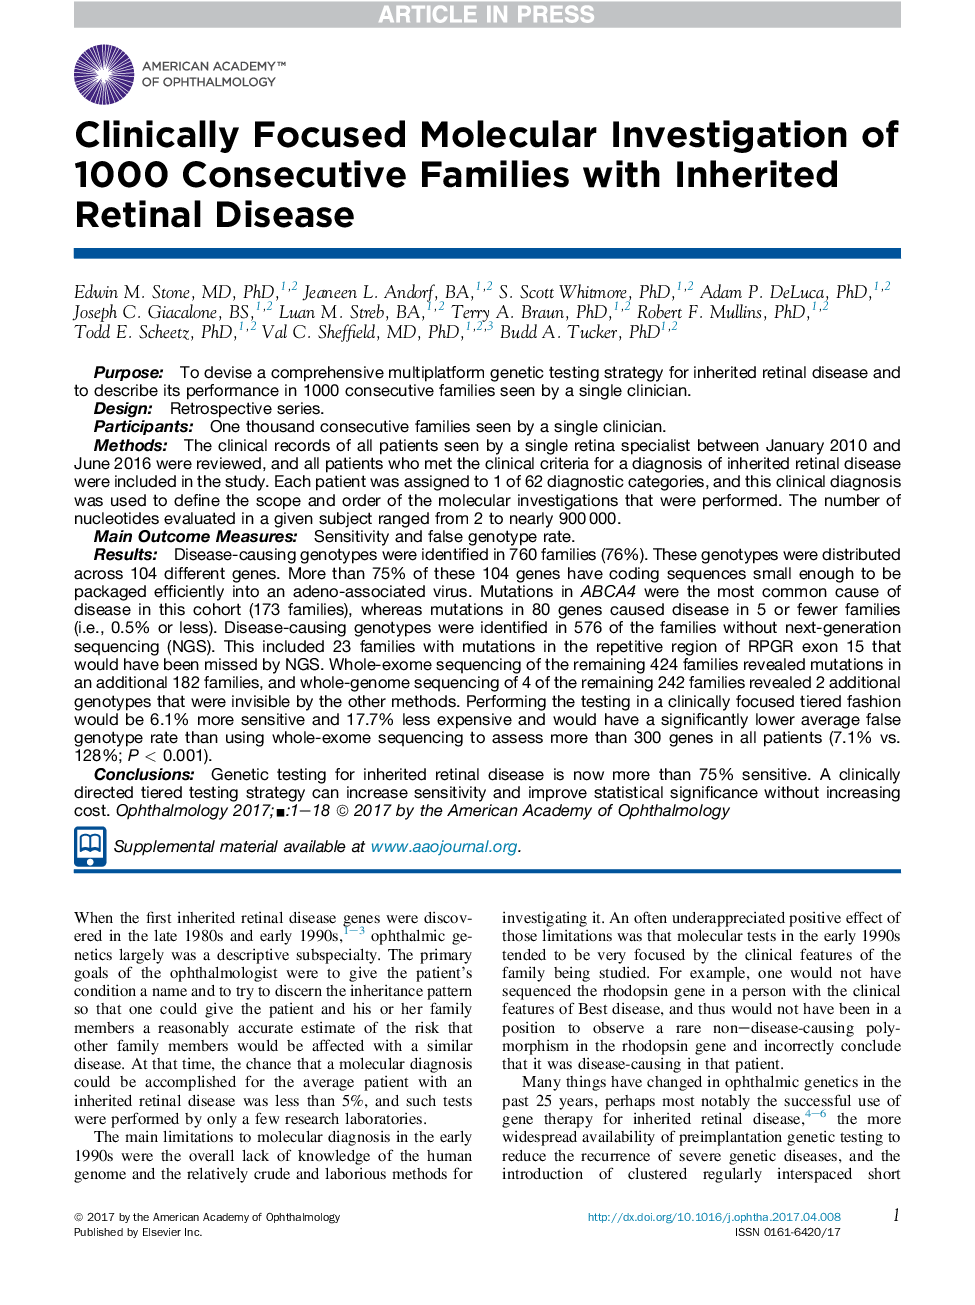 Clinically Focused Molecular Investigation of 1000 Consecutive Families with Inherited Retinal Disease